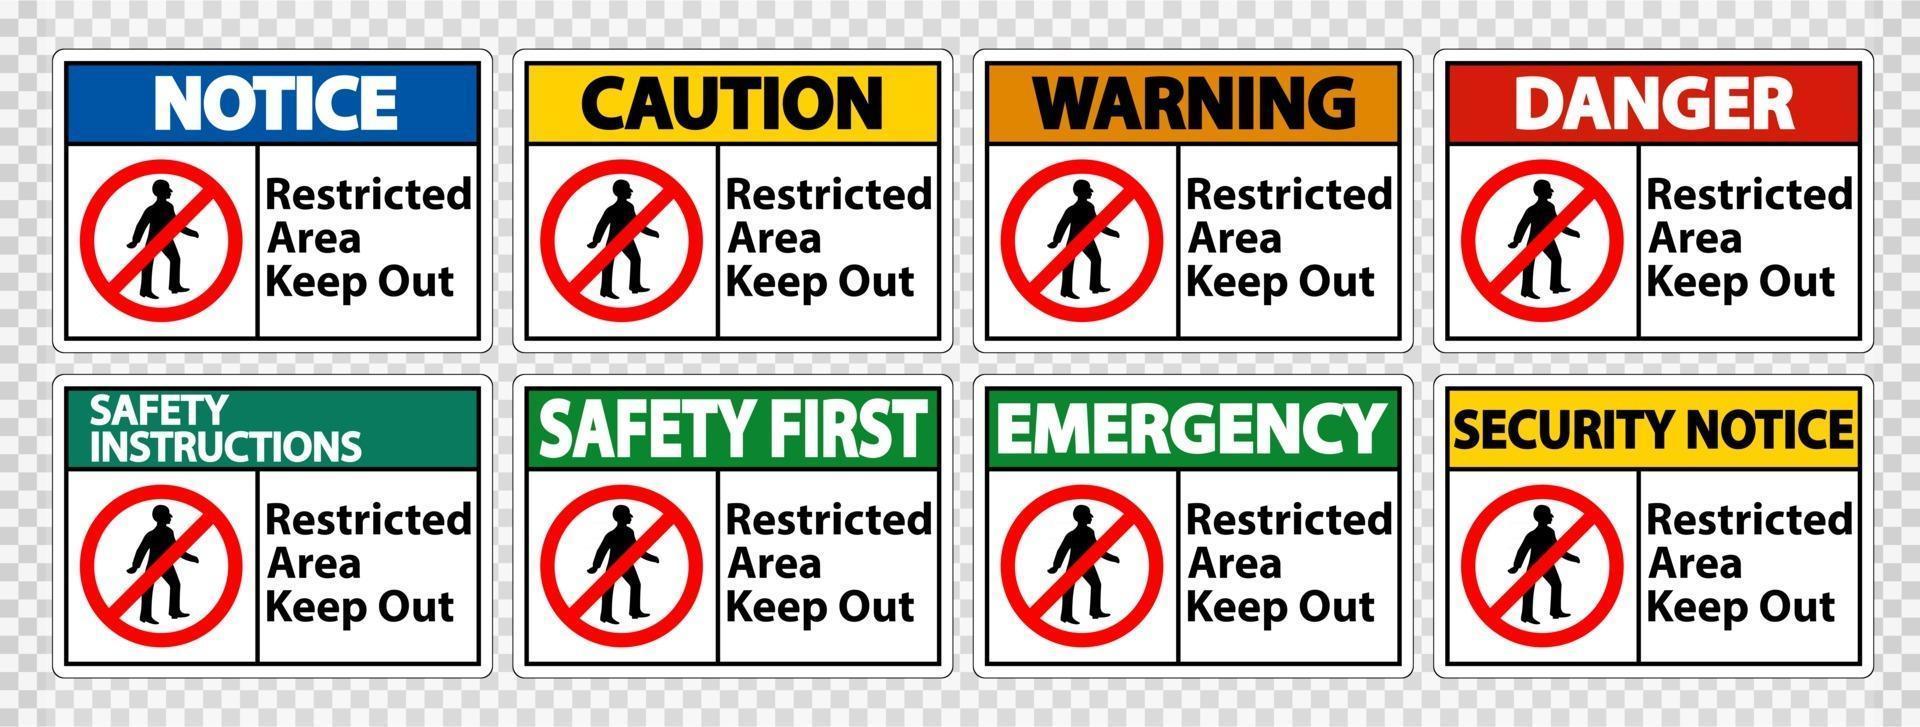 Restricted Area Keep Out Symbol Sign Isolate on transparent Background,Vector Illustration vector